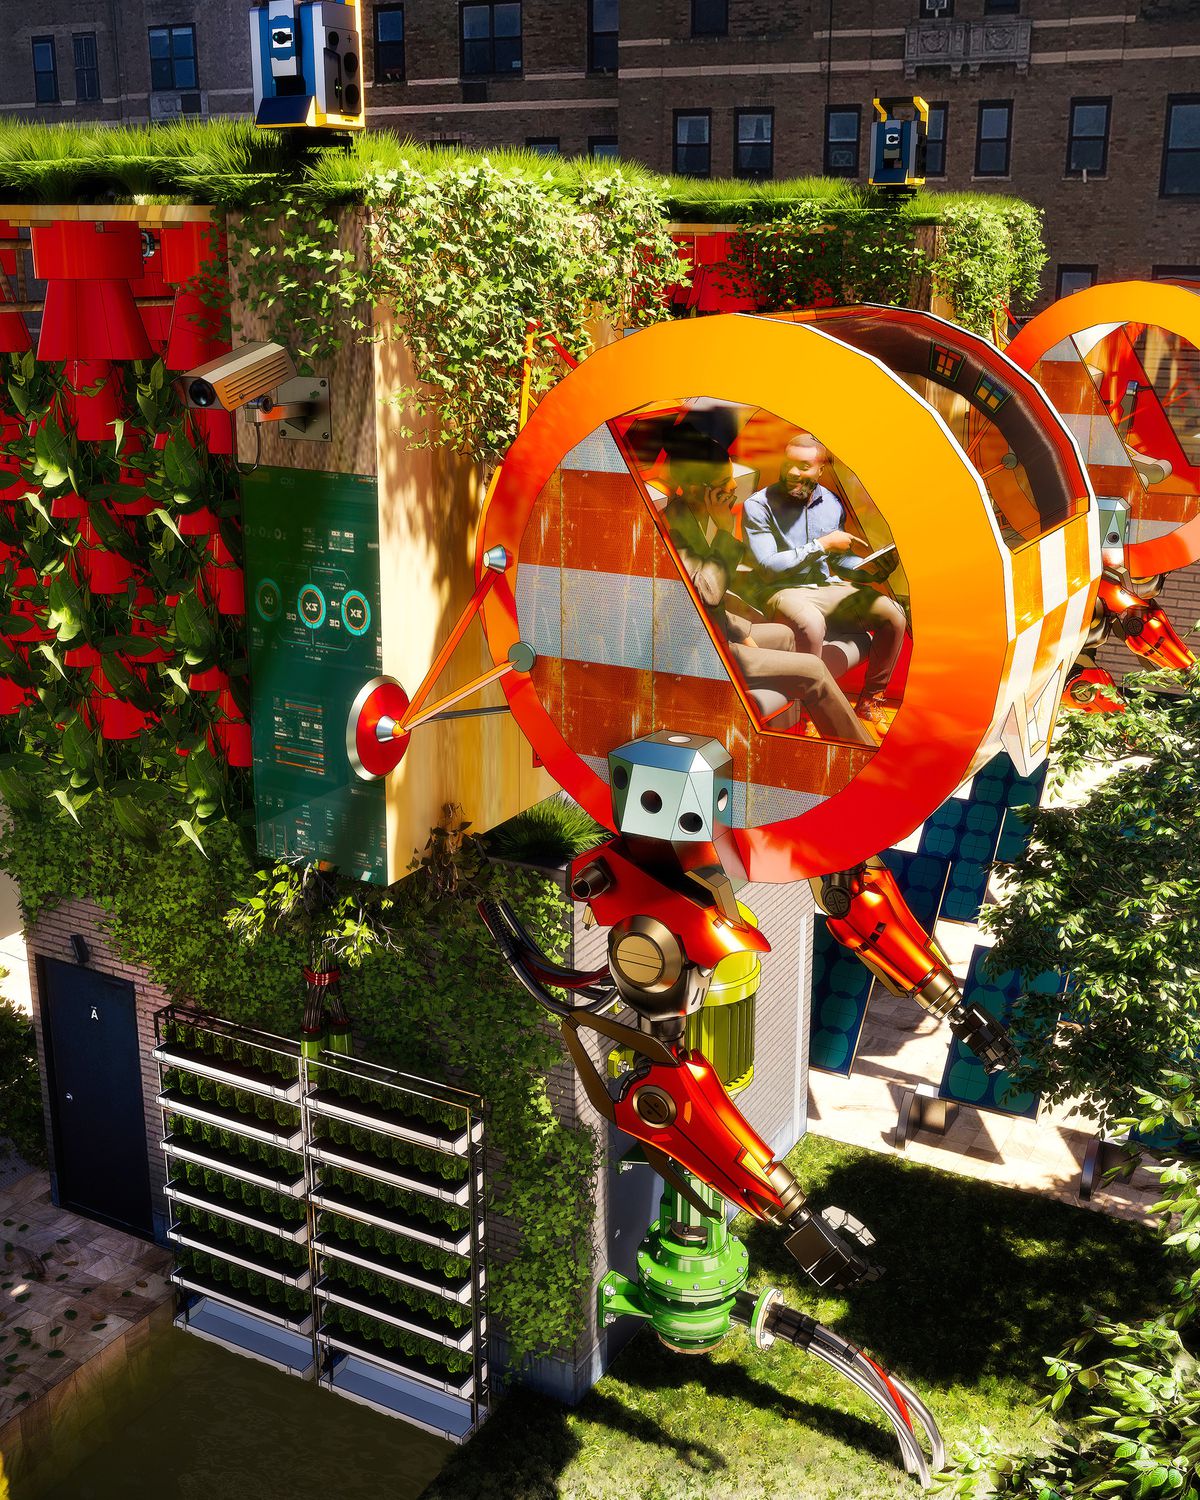 A rooftop turned into a lush farm with two people sitting in a robotic harvesting device